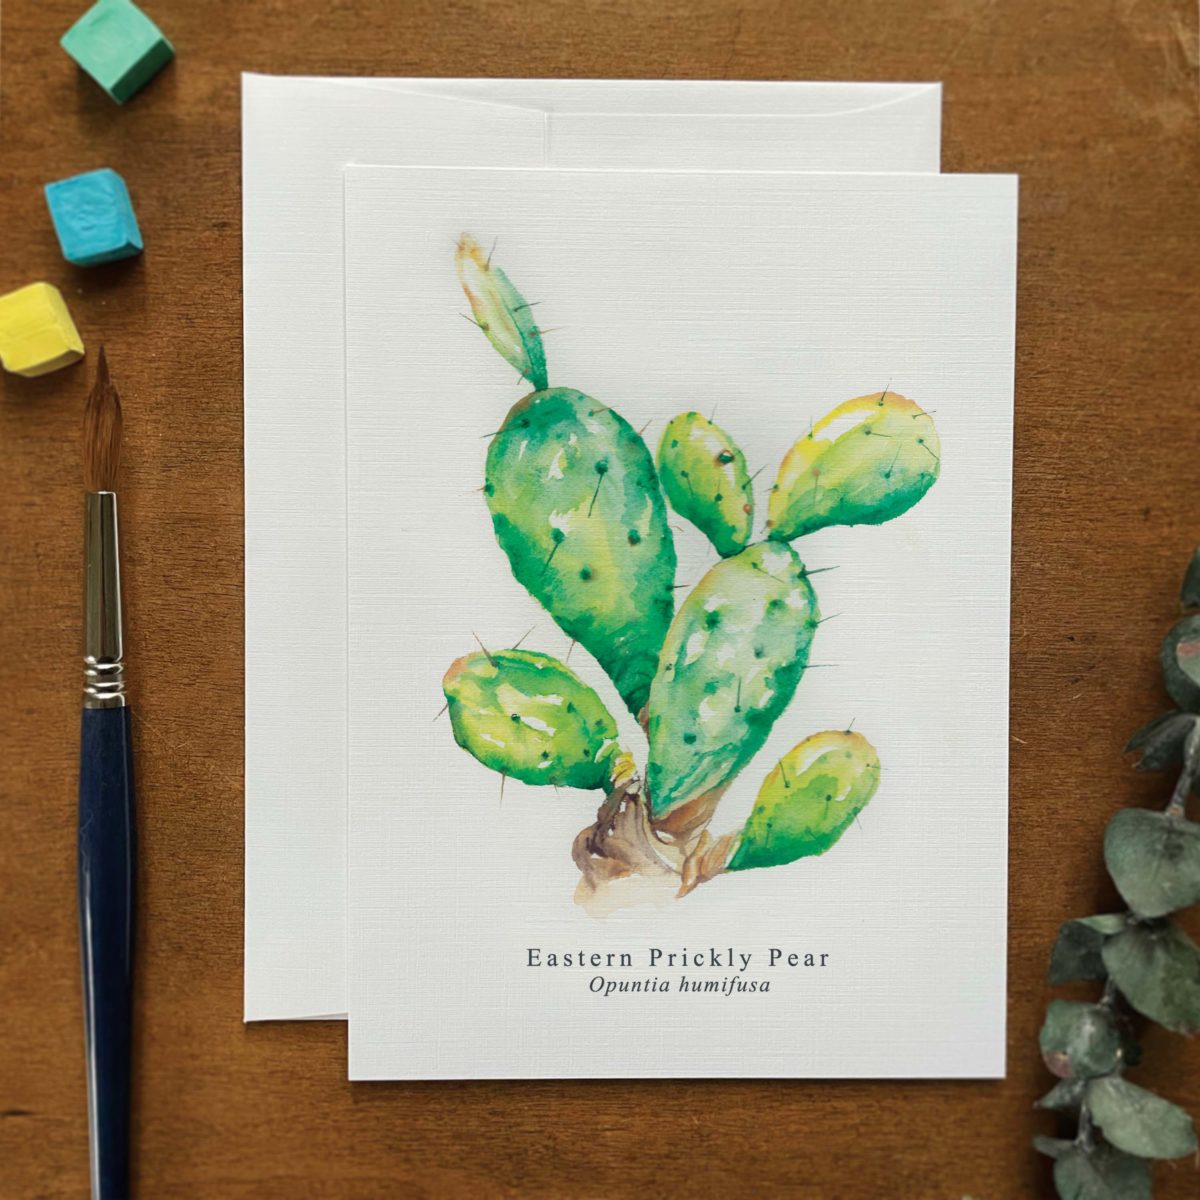 A2 greeting card of an Eastern Prickly Pear